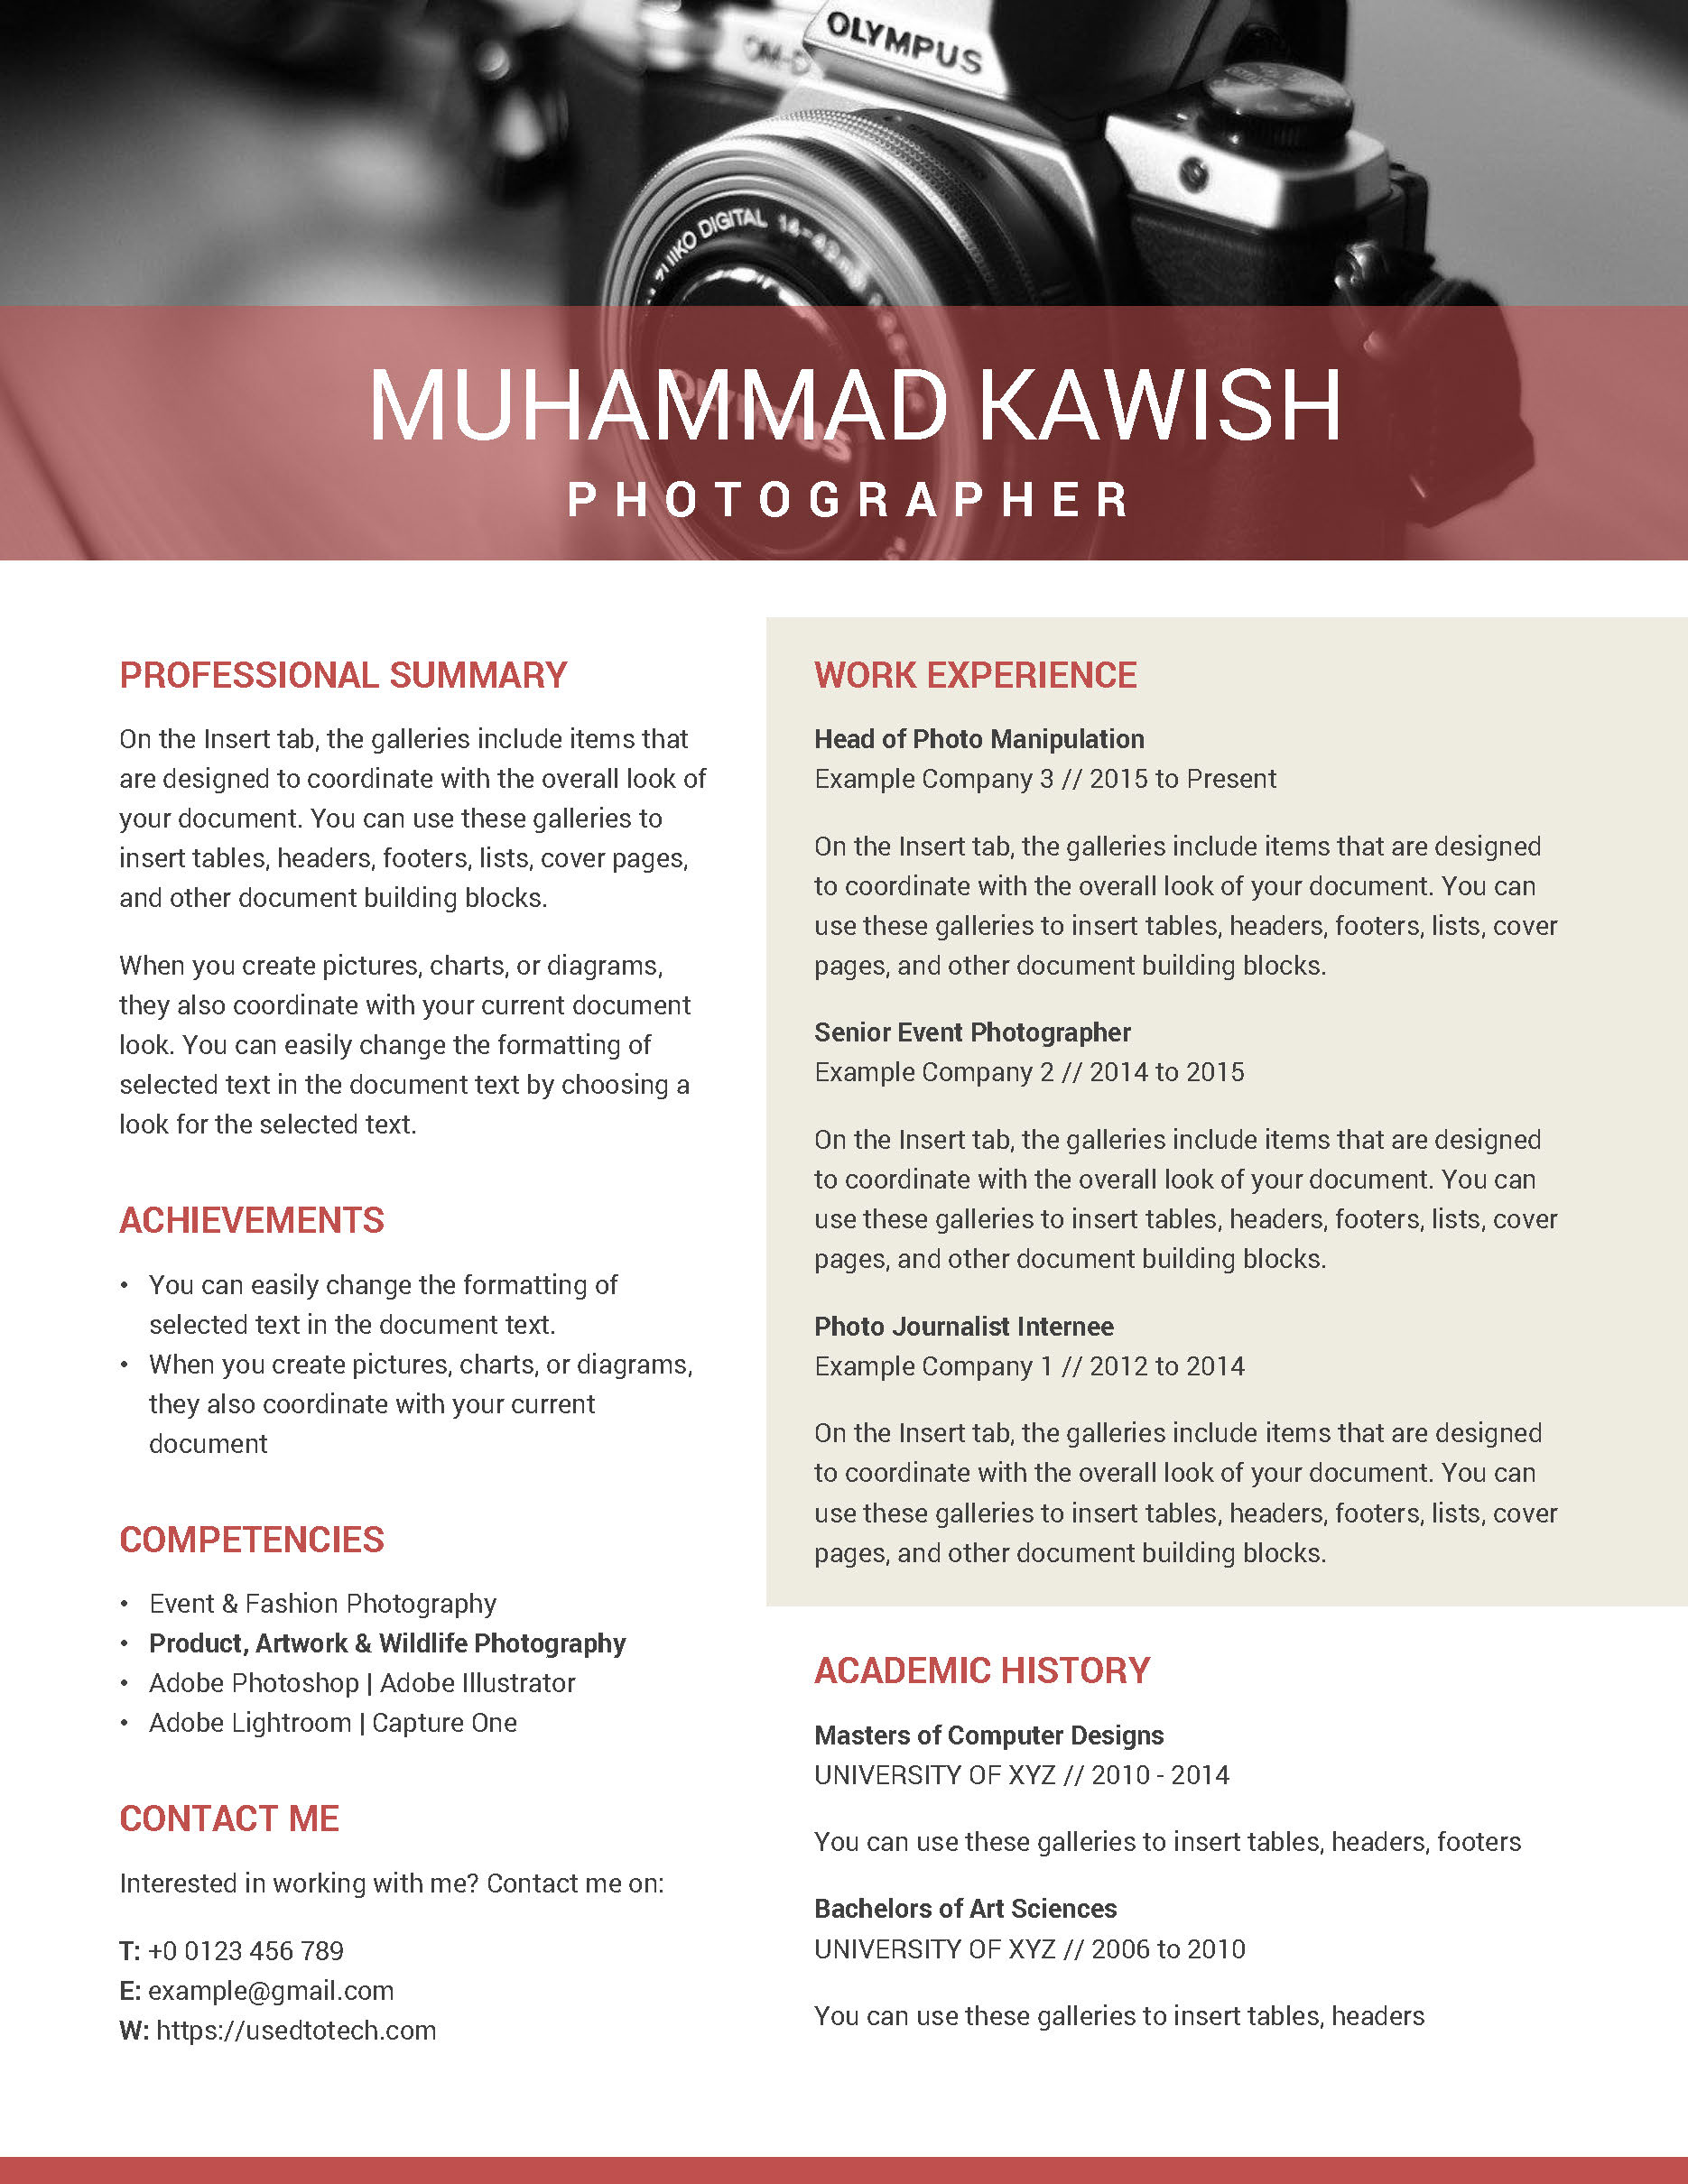 Editable infographic resume in Word for professionals